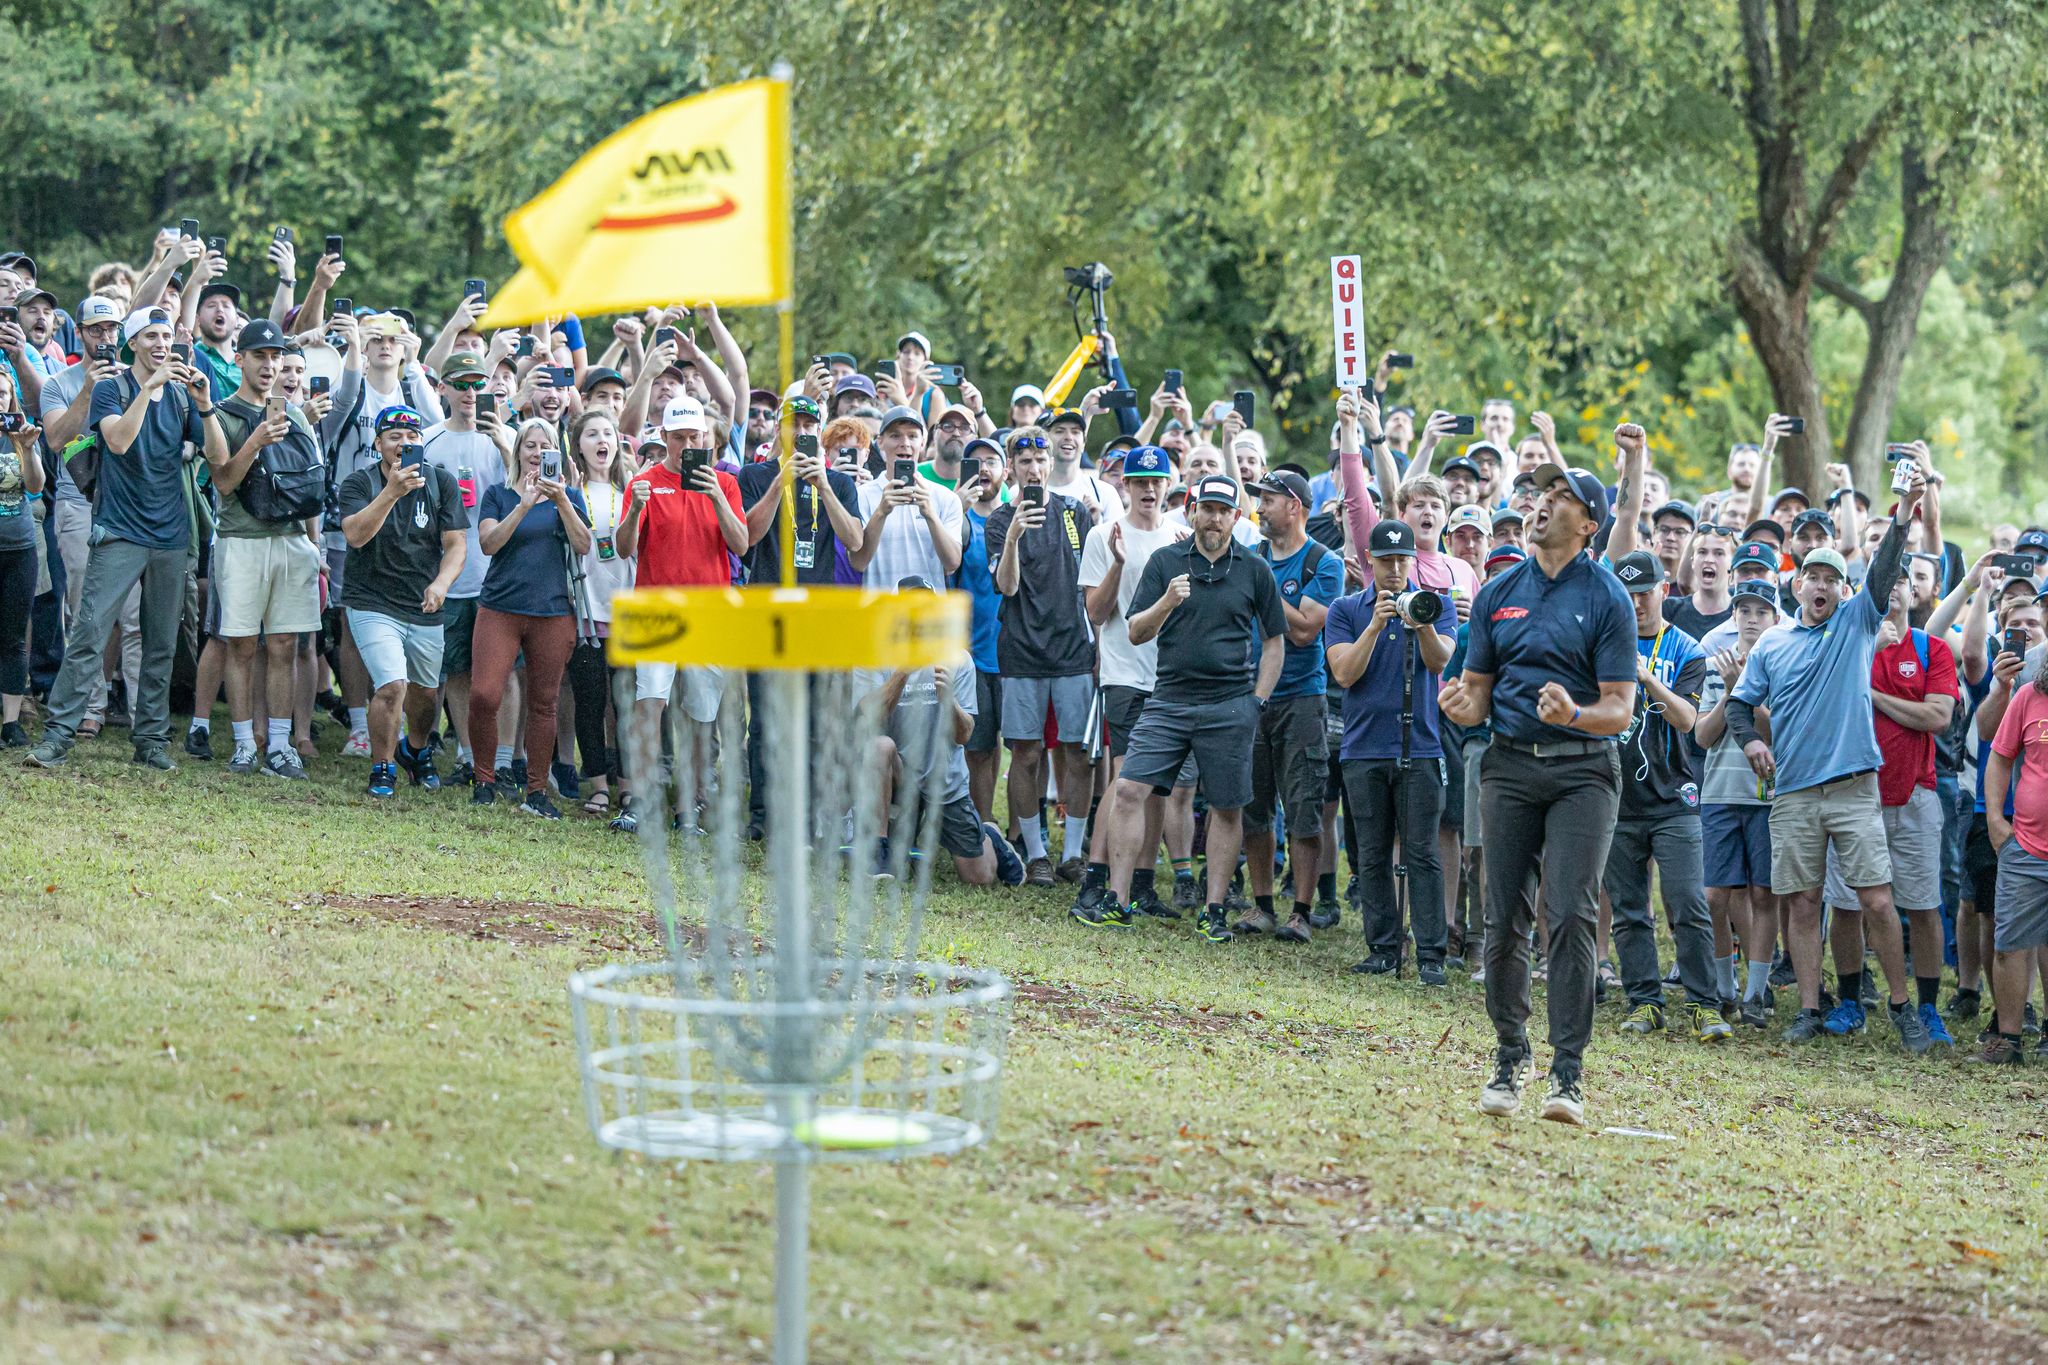 18 Facts About National Disc Golf Championship